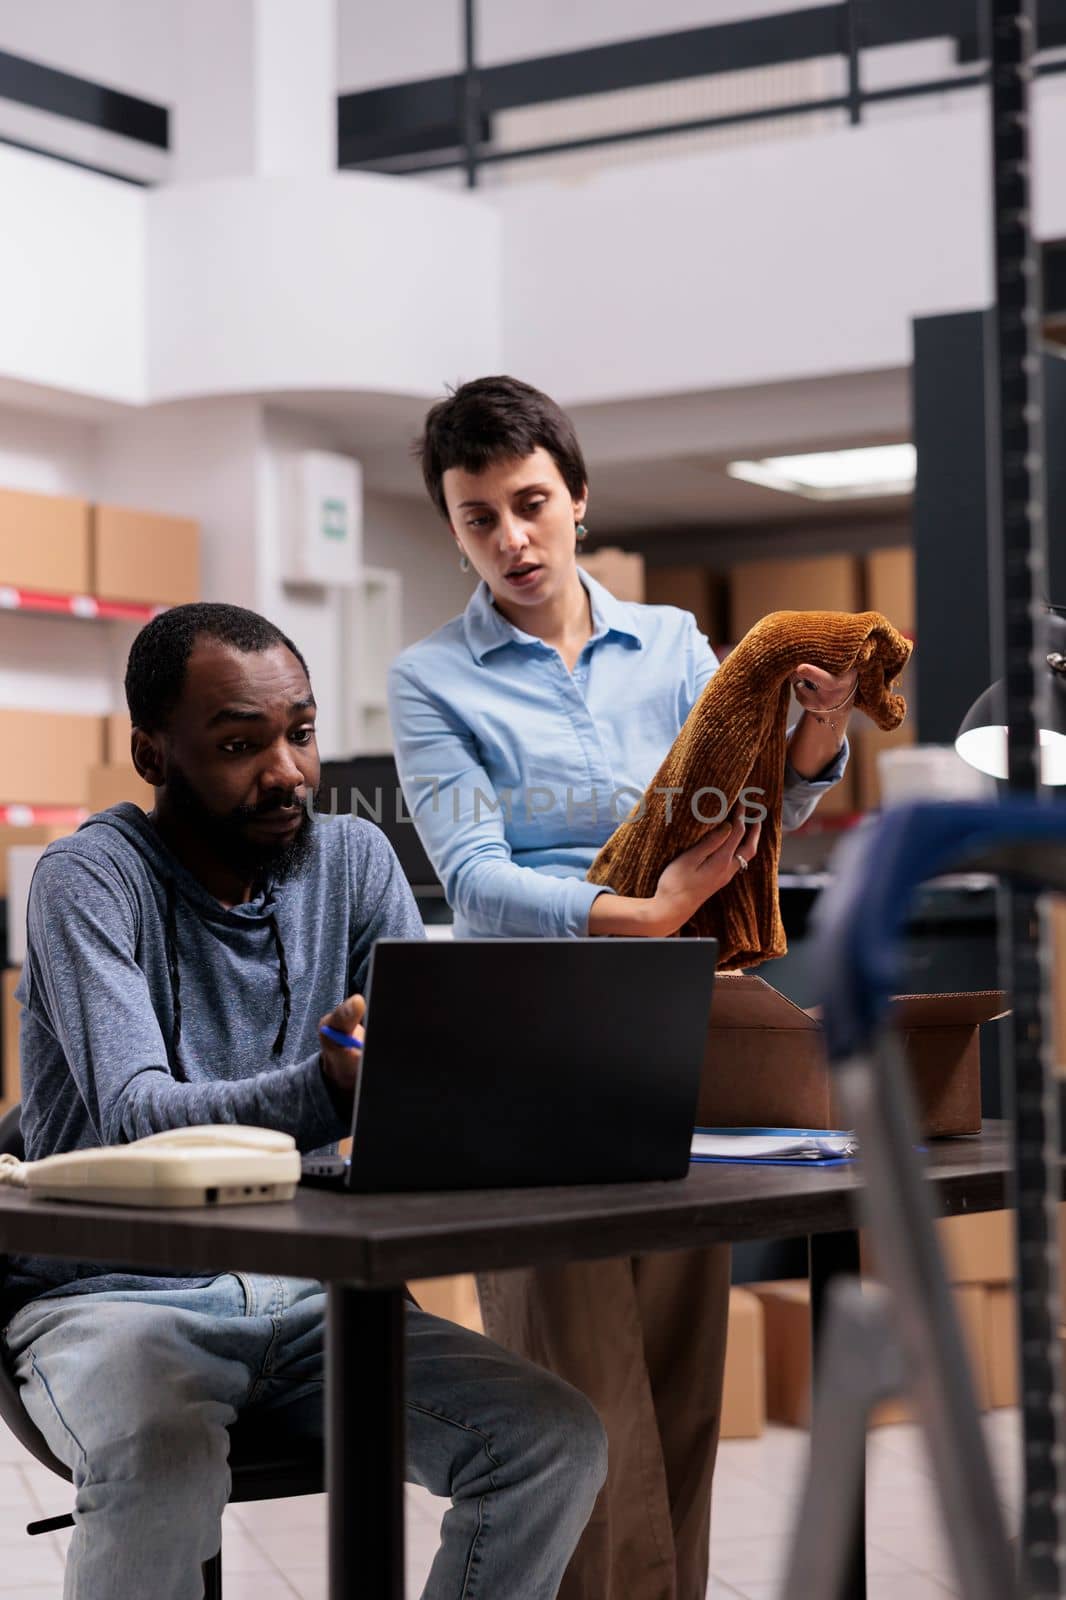 Fashion storehouse manager putting trendy blouse in carton box while supervisor man analyzing distribution on laptop by DCStudio